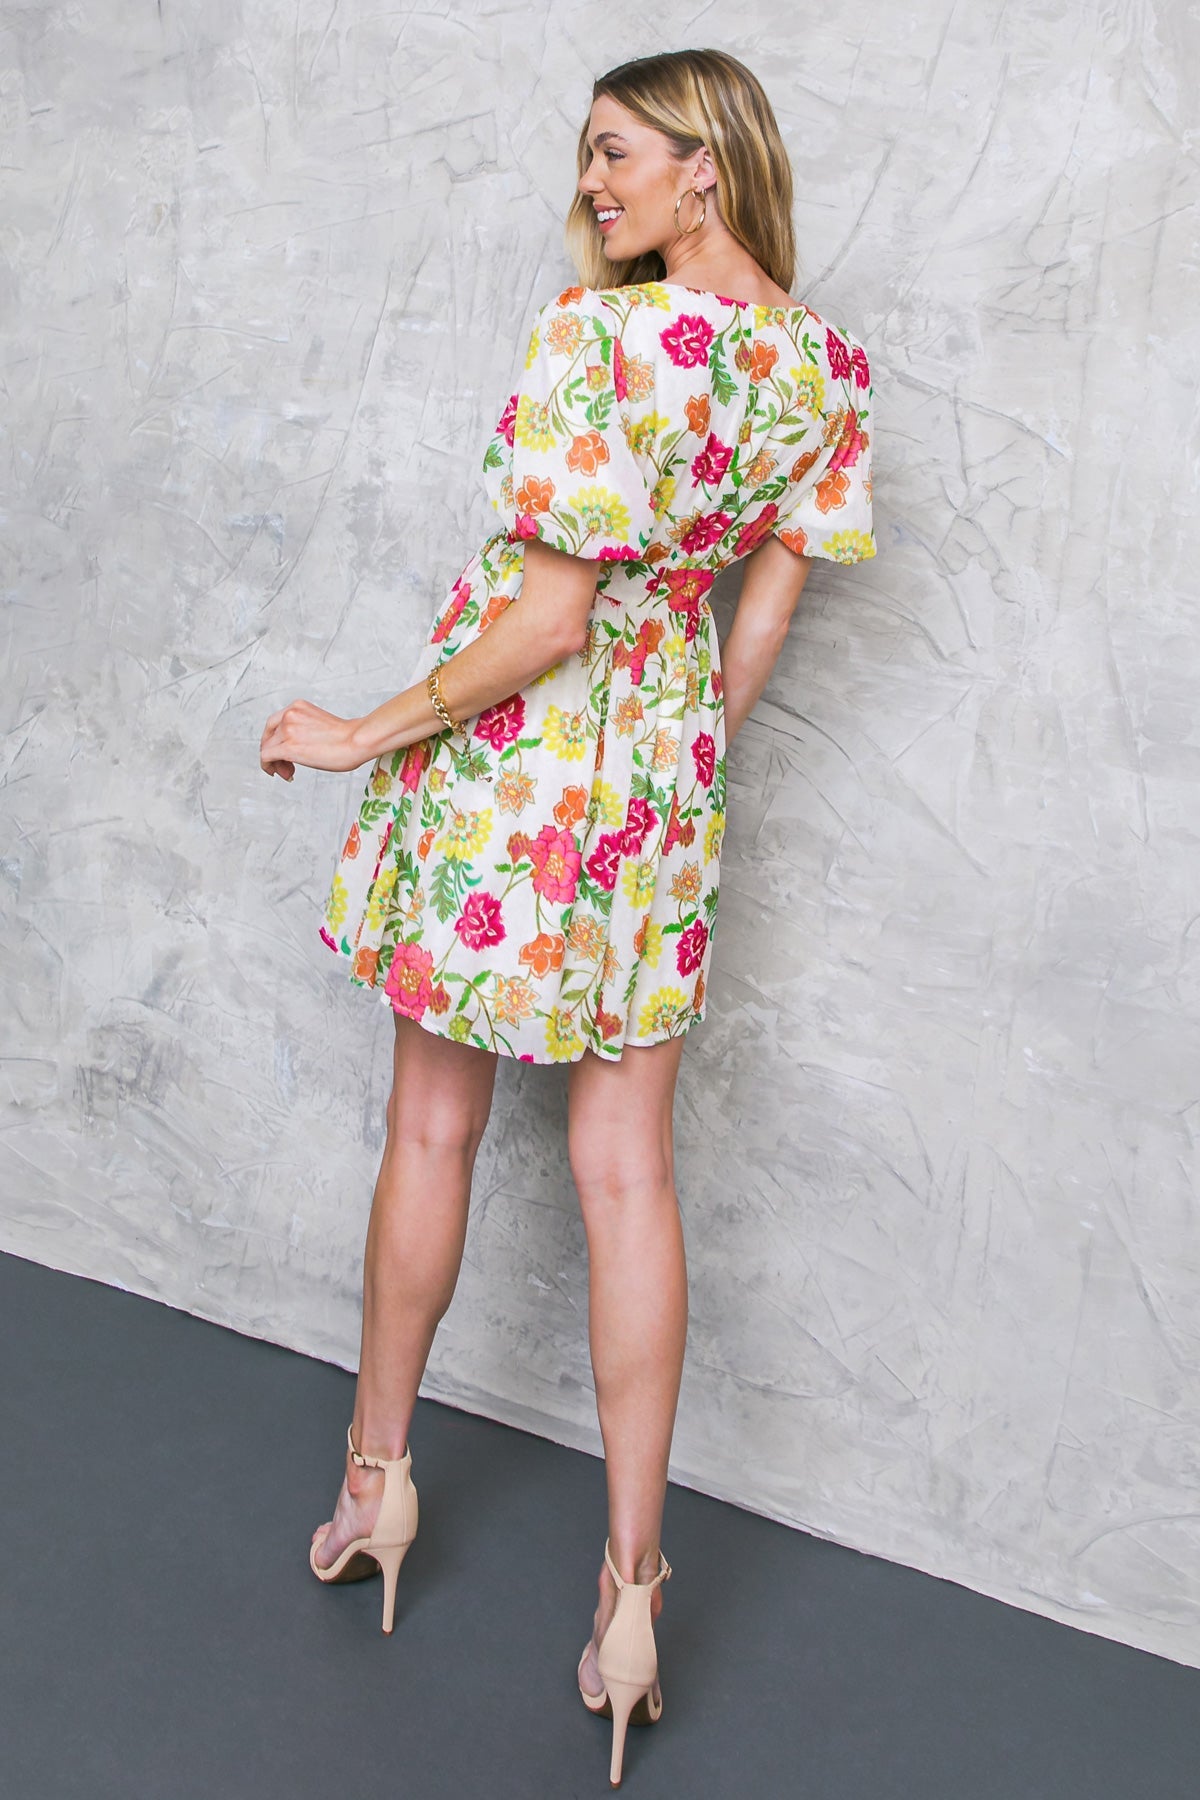 FREE ME TODAY FLORAL WOVEN MINI DRESS